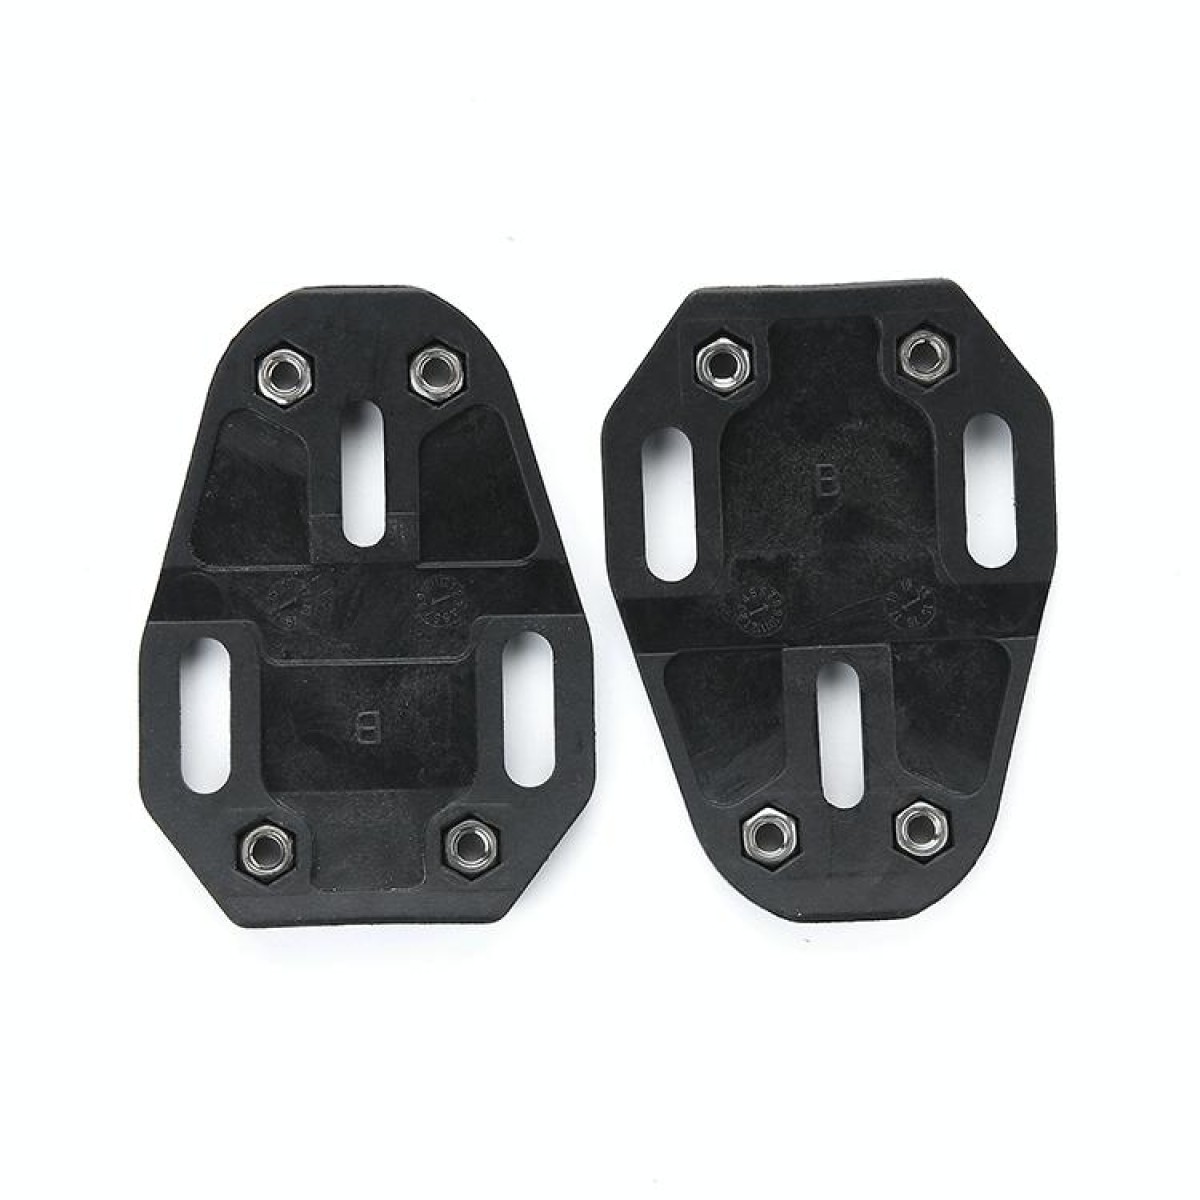 3 Hole Road Bike Pedal Cleat Spacer Shim for SpeedPlay Zero Pedal, Camber: 6 Degrees